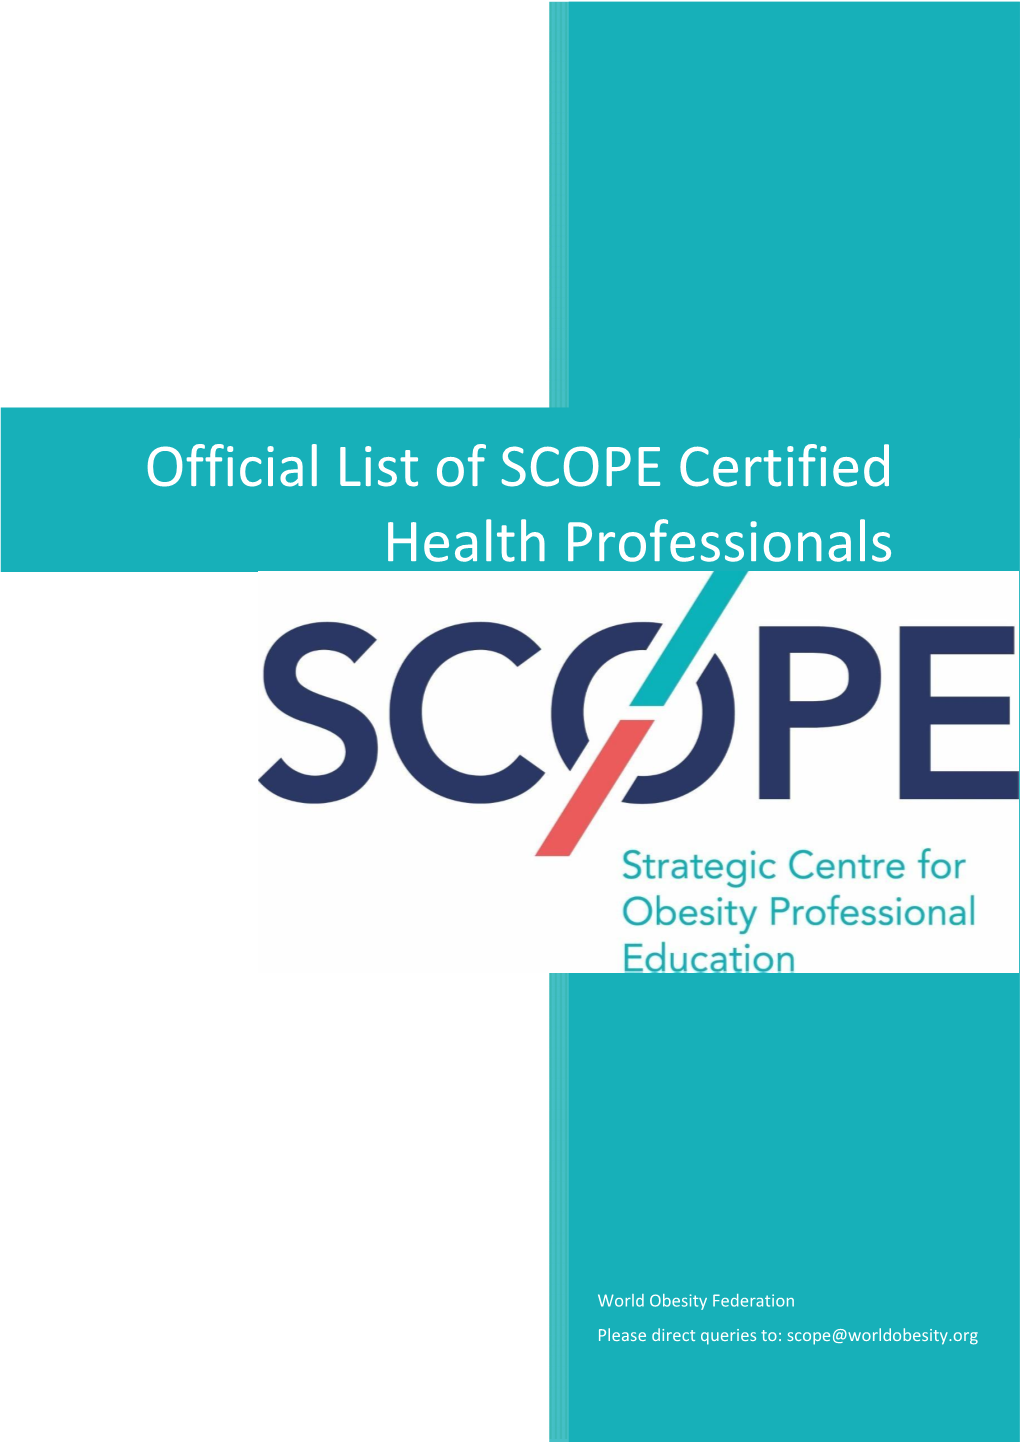 Official List of SCOPE Certified Health Professionals